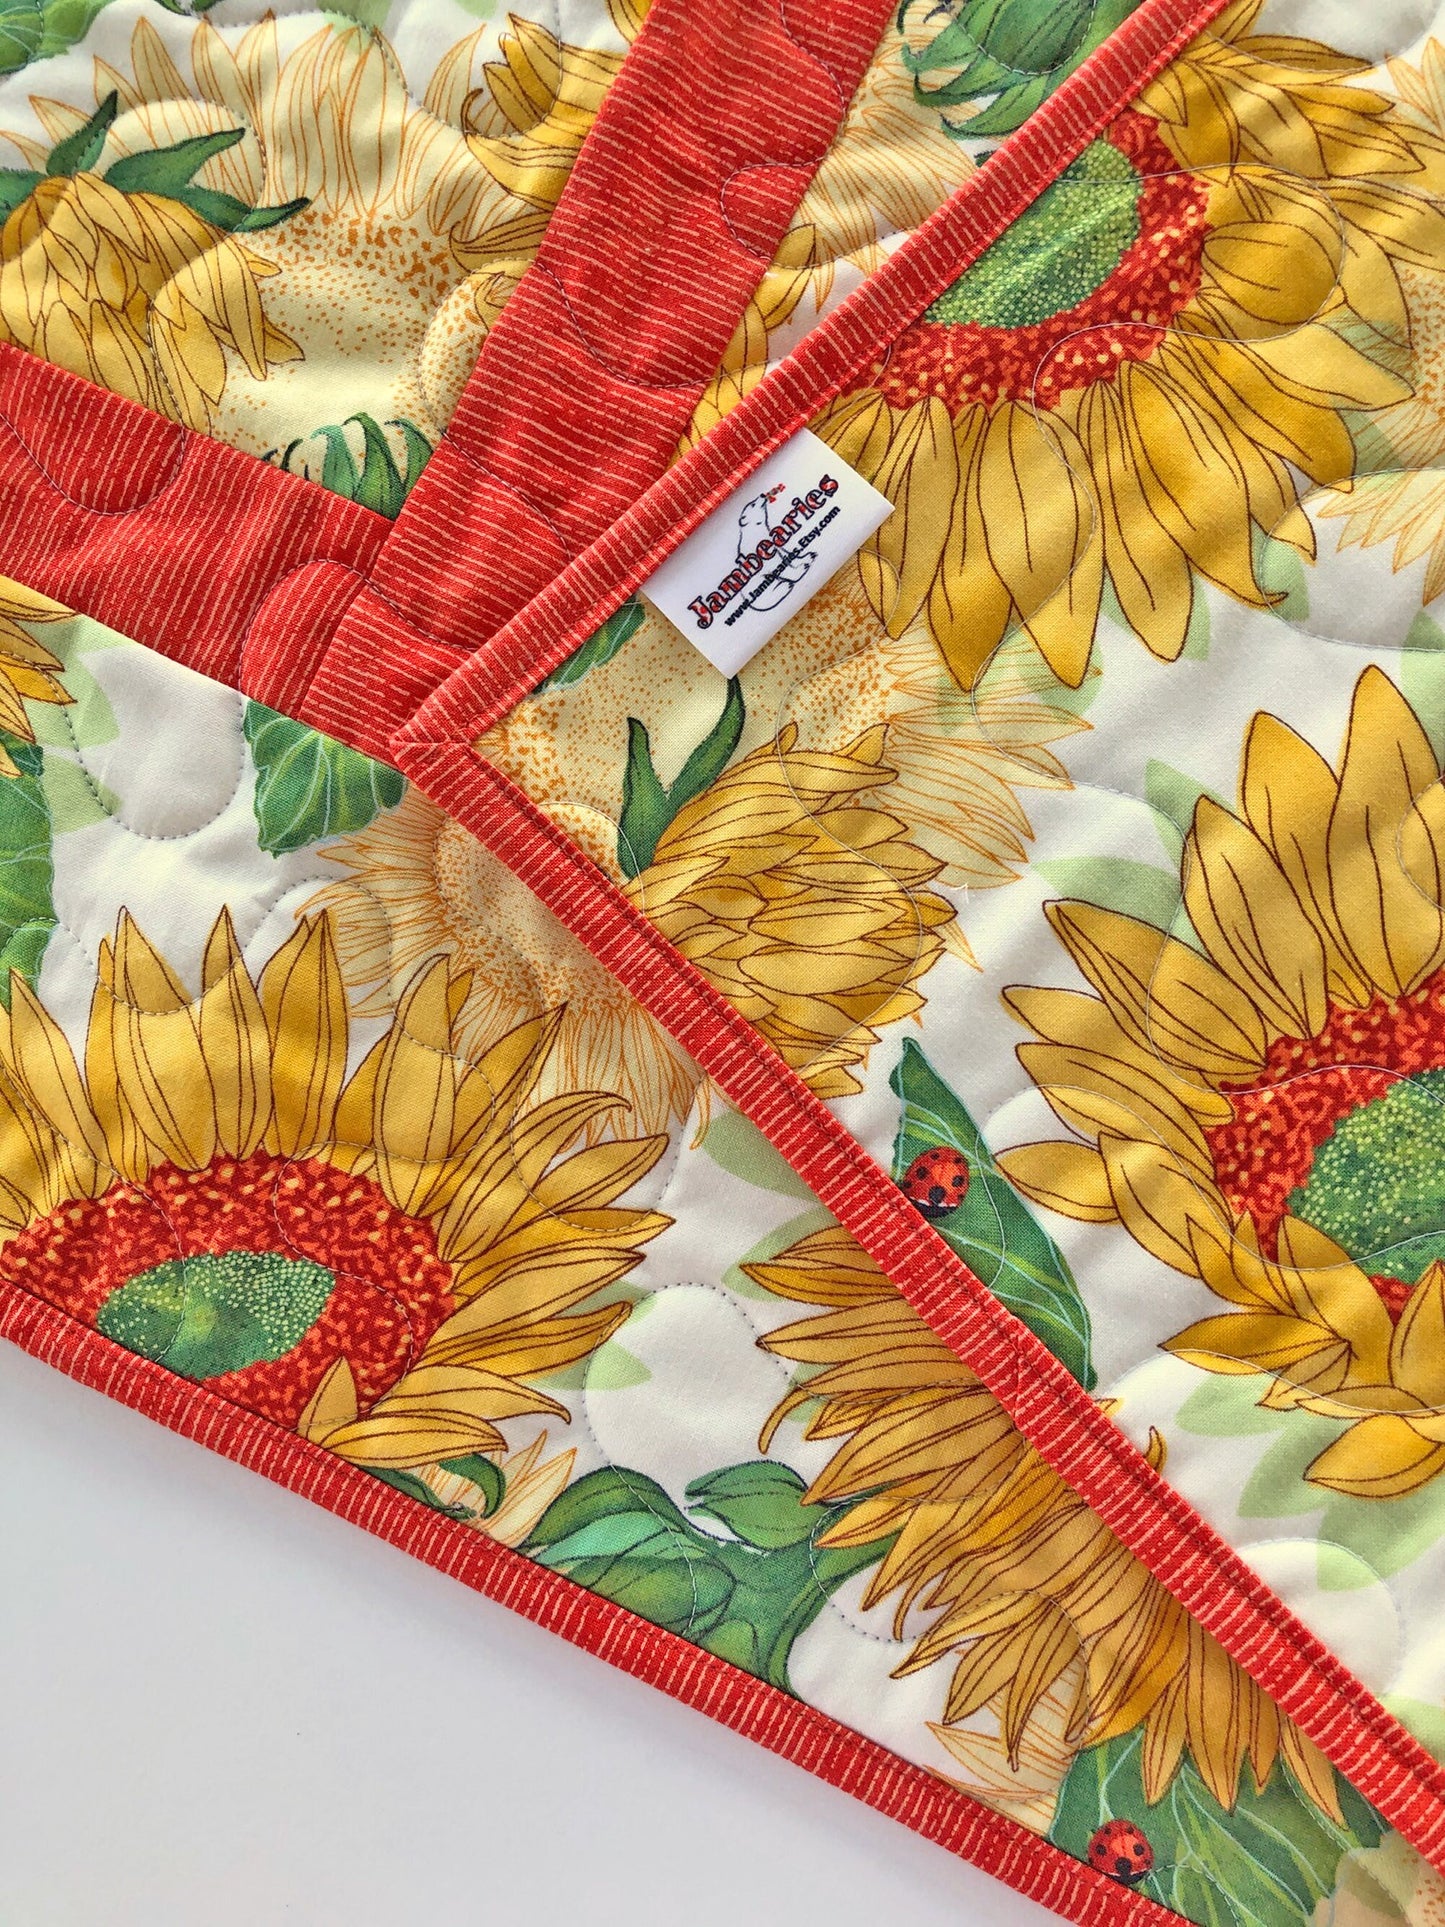 Yellow Sunflowers Quilted Table Runner, 18" x 54.75", Solana Quilted Table Topper Quilt, Yellow Orange Green Floral Table Runner